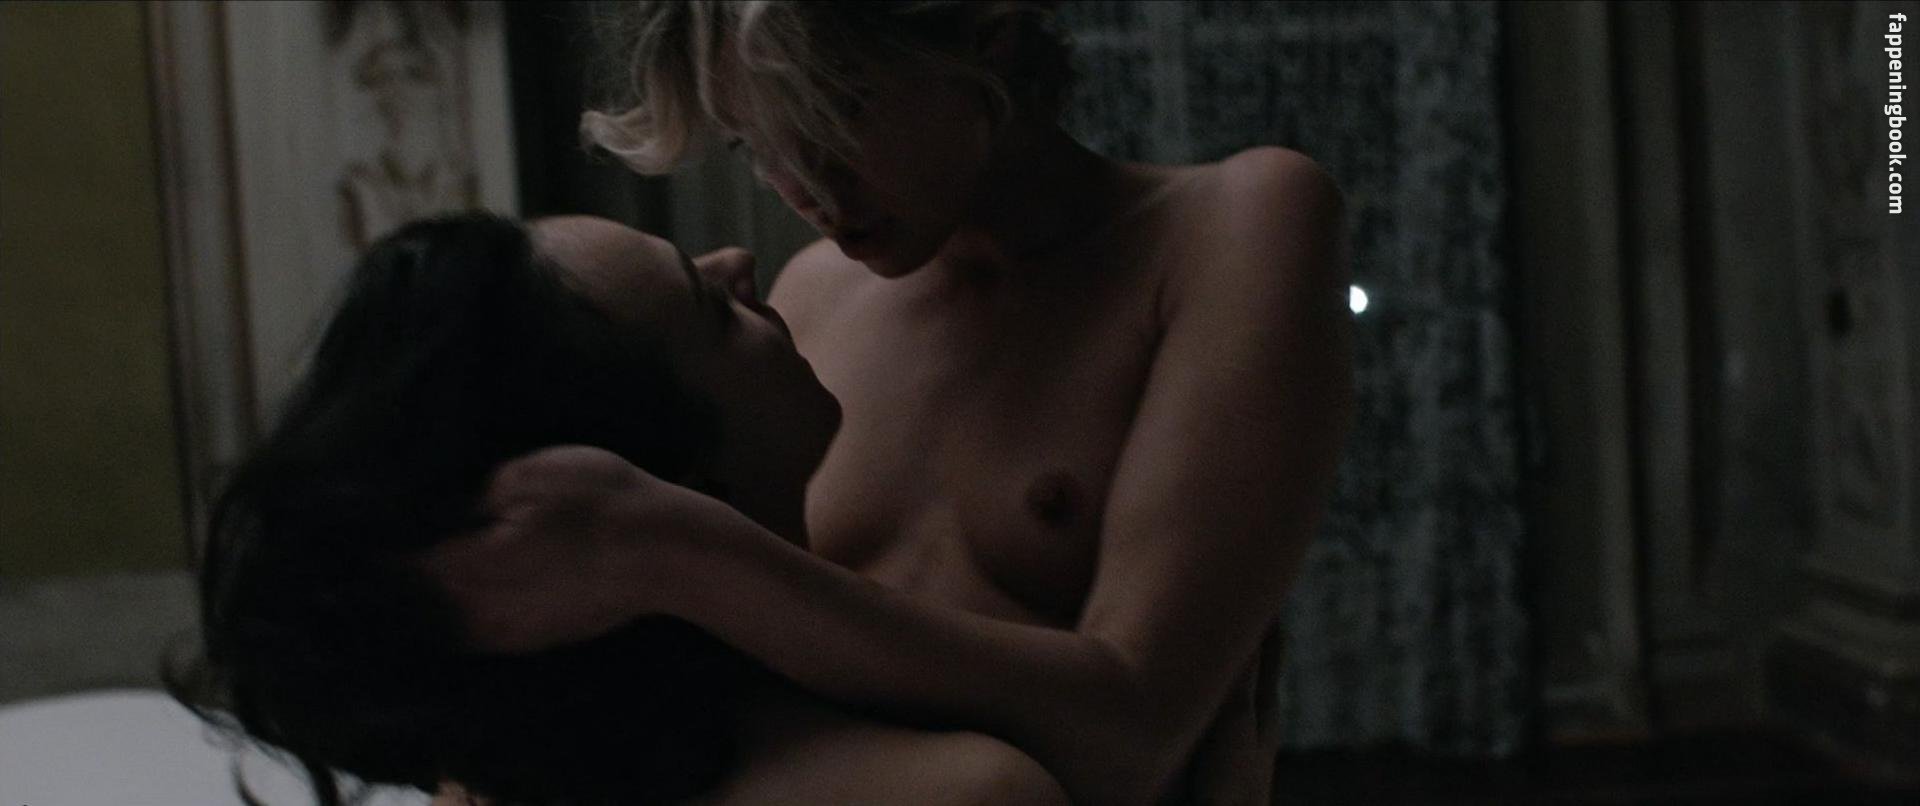 Analeigh Tipton Nude, The Fappening - Photo #33140 - FappeningBook.